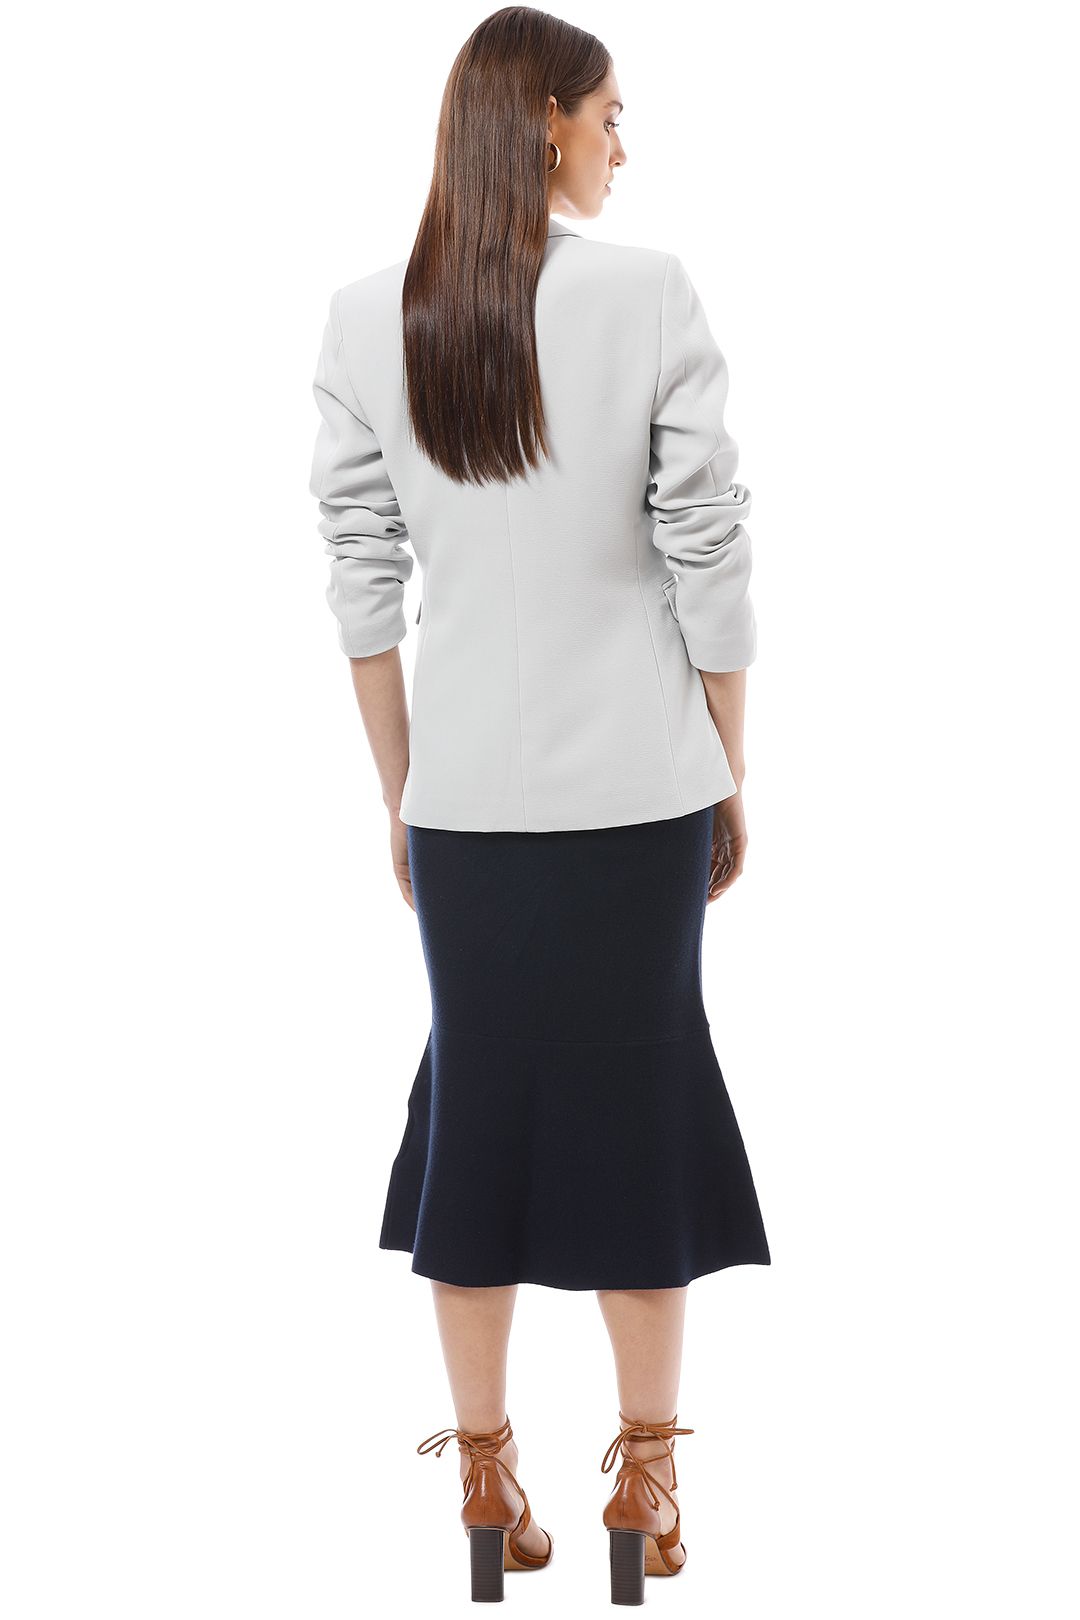 Friend of Audrey - Alma Fitted Blazer - Blue - Back